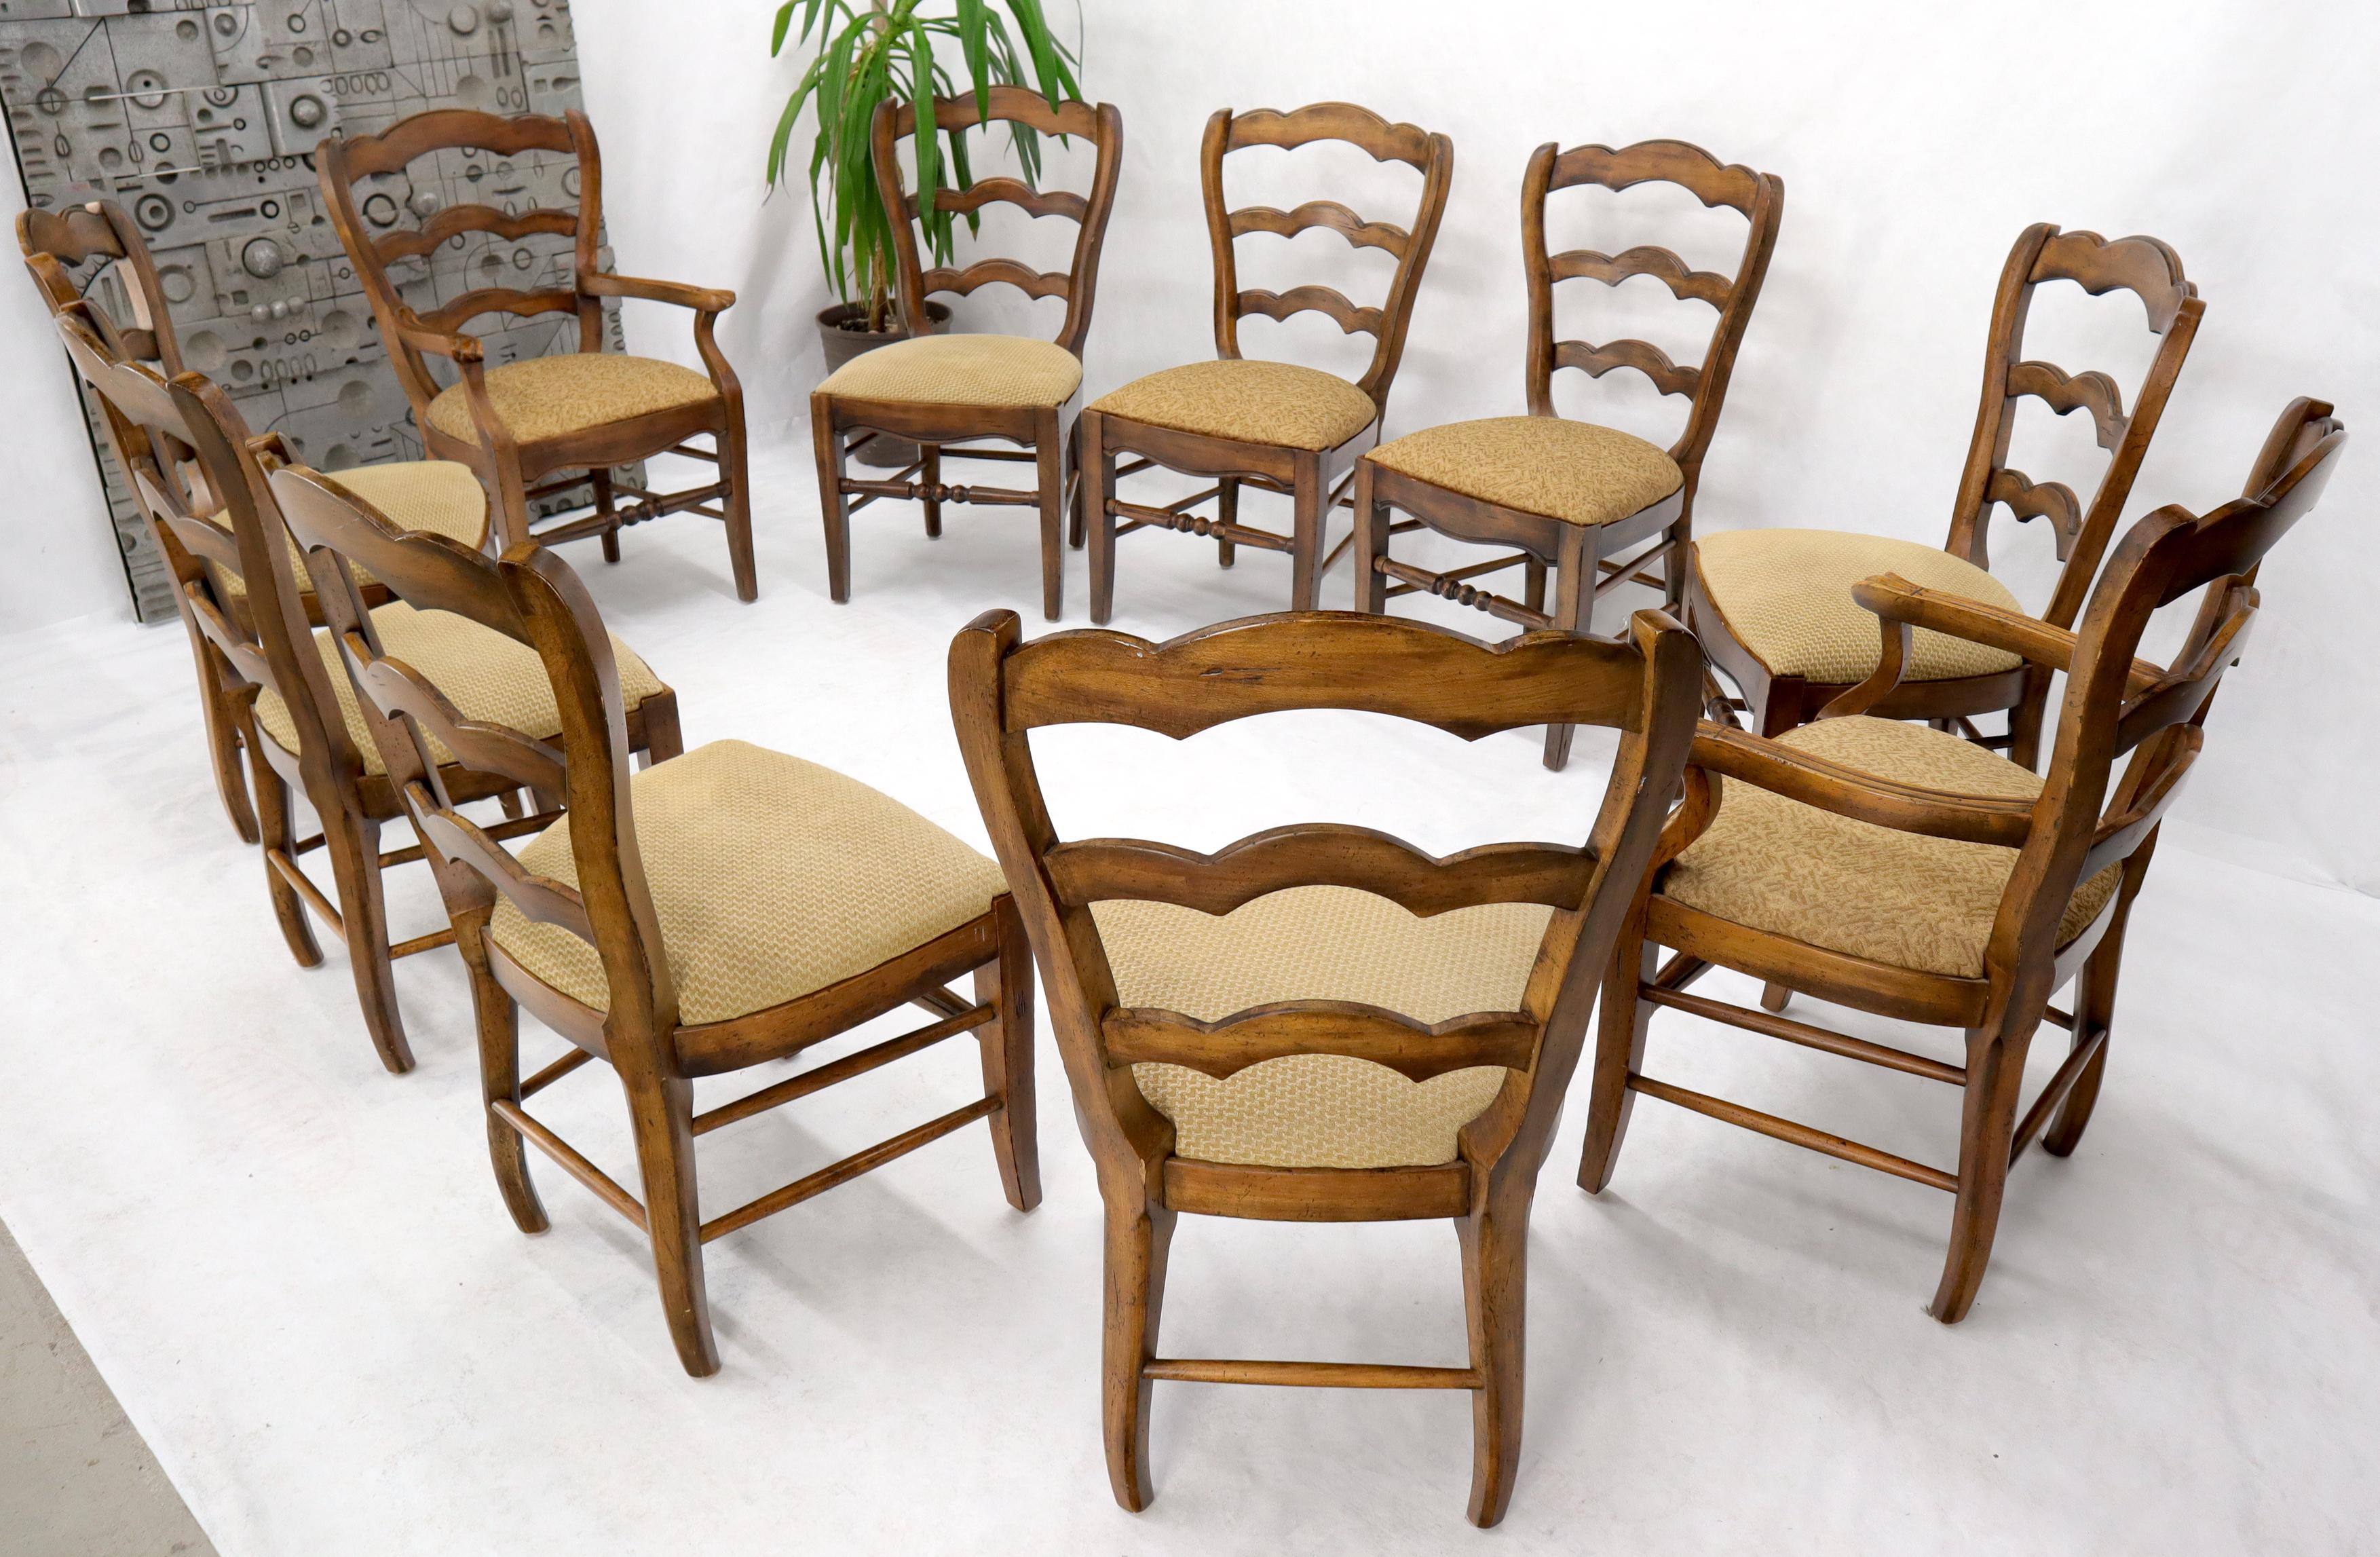 Set of eight ladder back colonial Spanish dining chairs by Henredon.